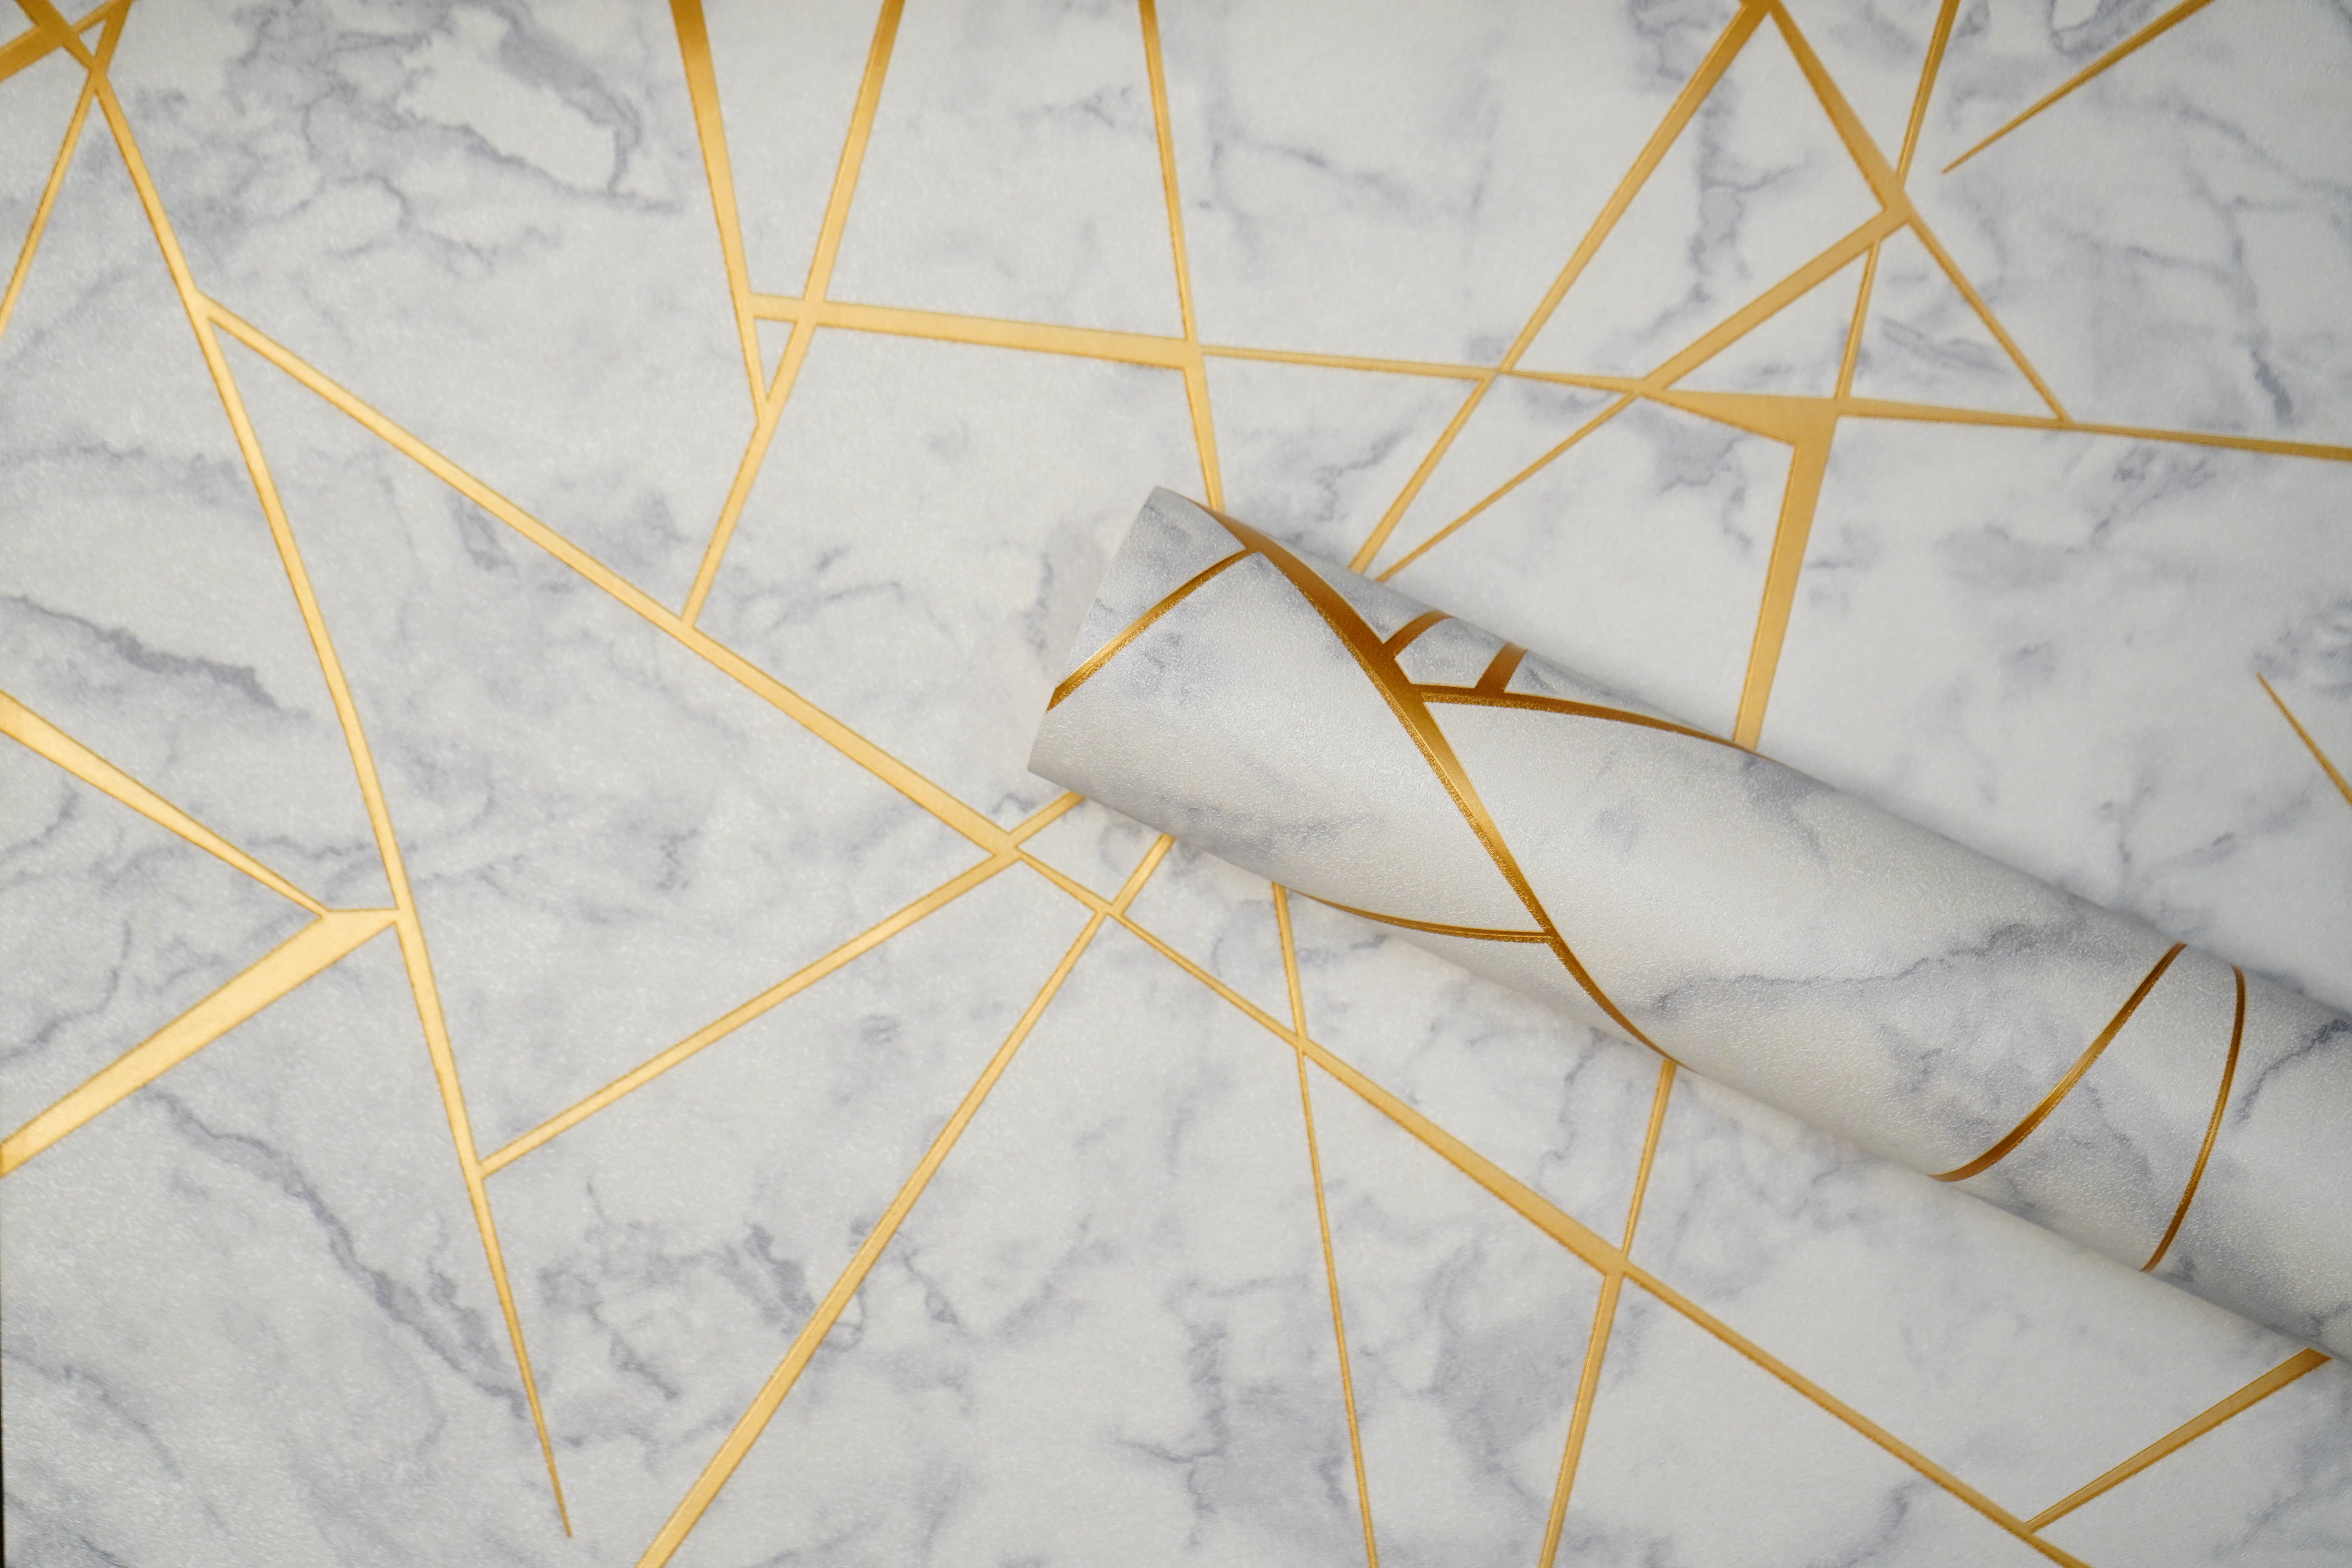 Off White Marble Design with Golden Stripes Not Self Adhesive 53 Cm X 1000 Cm for PVC Vinyl Coated for  Wall Bedroom Living Room Latest Stylish for Home Decoration (Off White , Golden , 57 Sqft Roll) (NW-42)